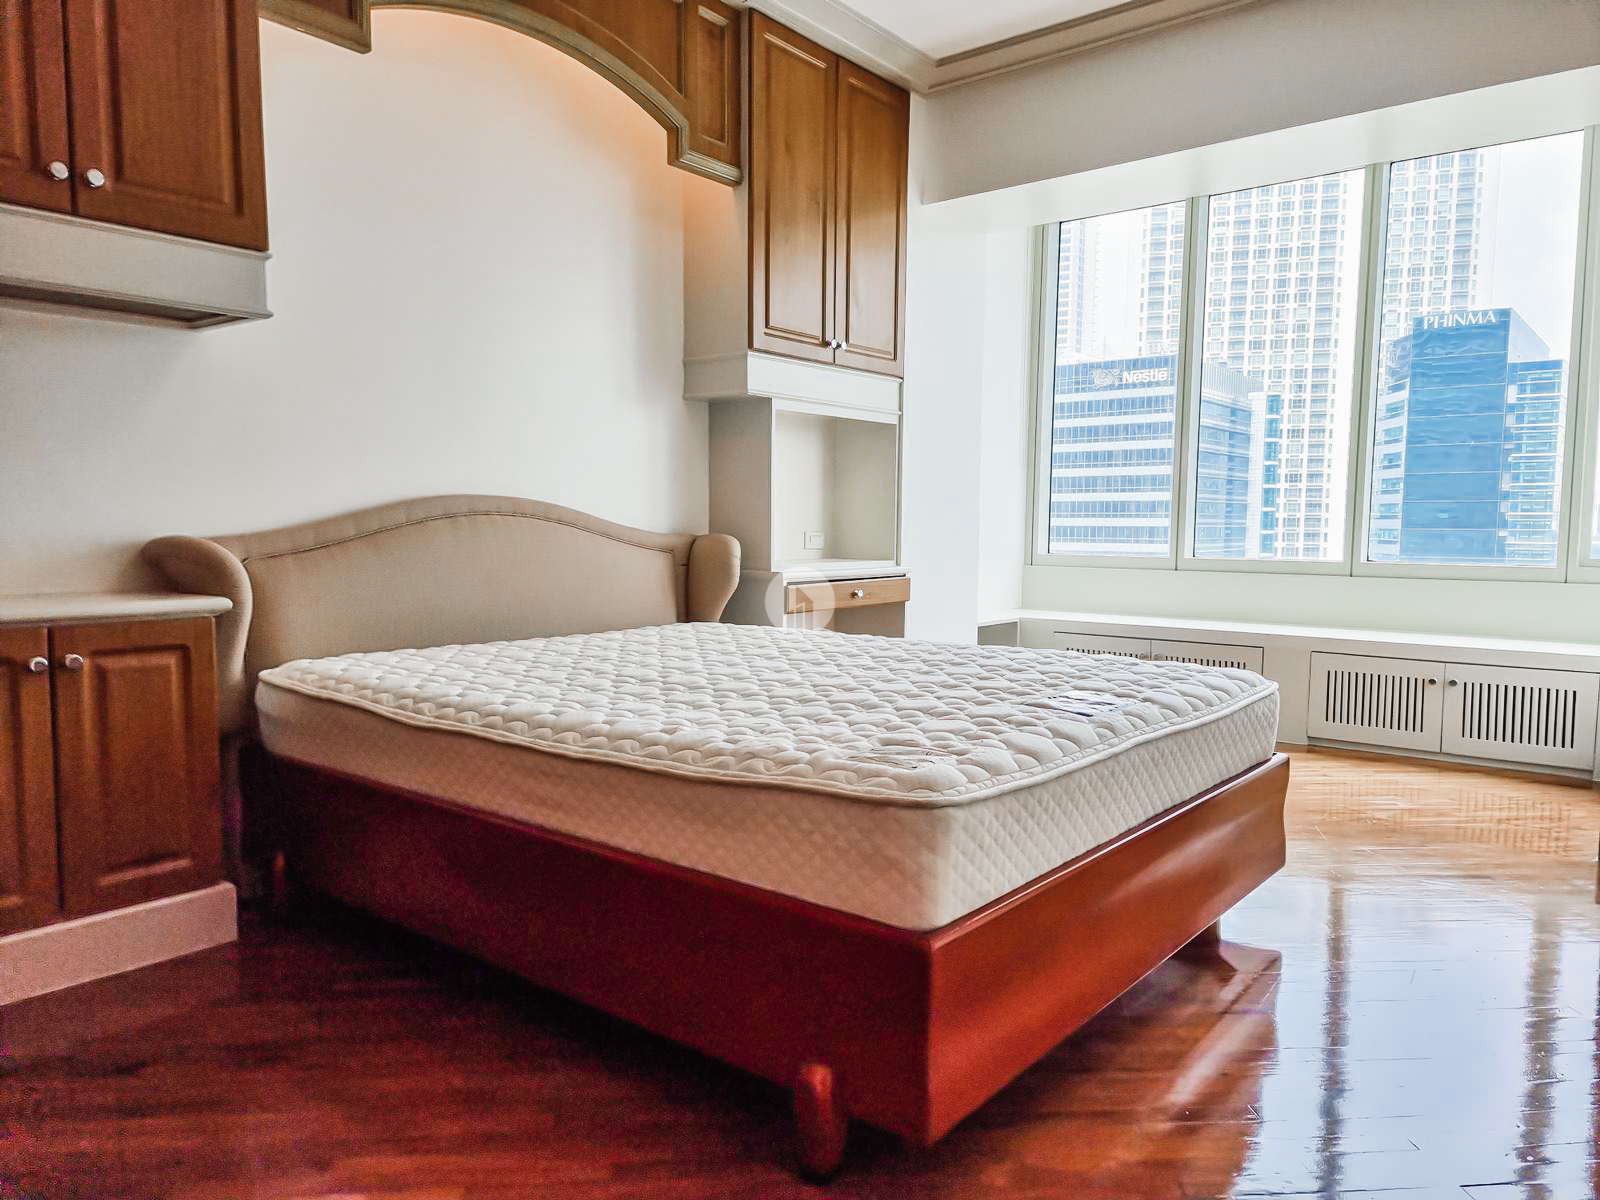 197sqm Condo Unit in Hidalgo Place Rockwell Makati for Lease - Golden Sphere Realty